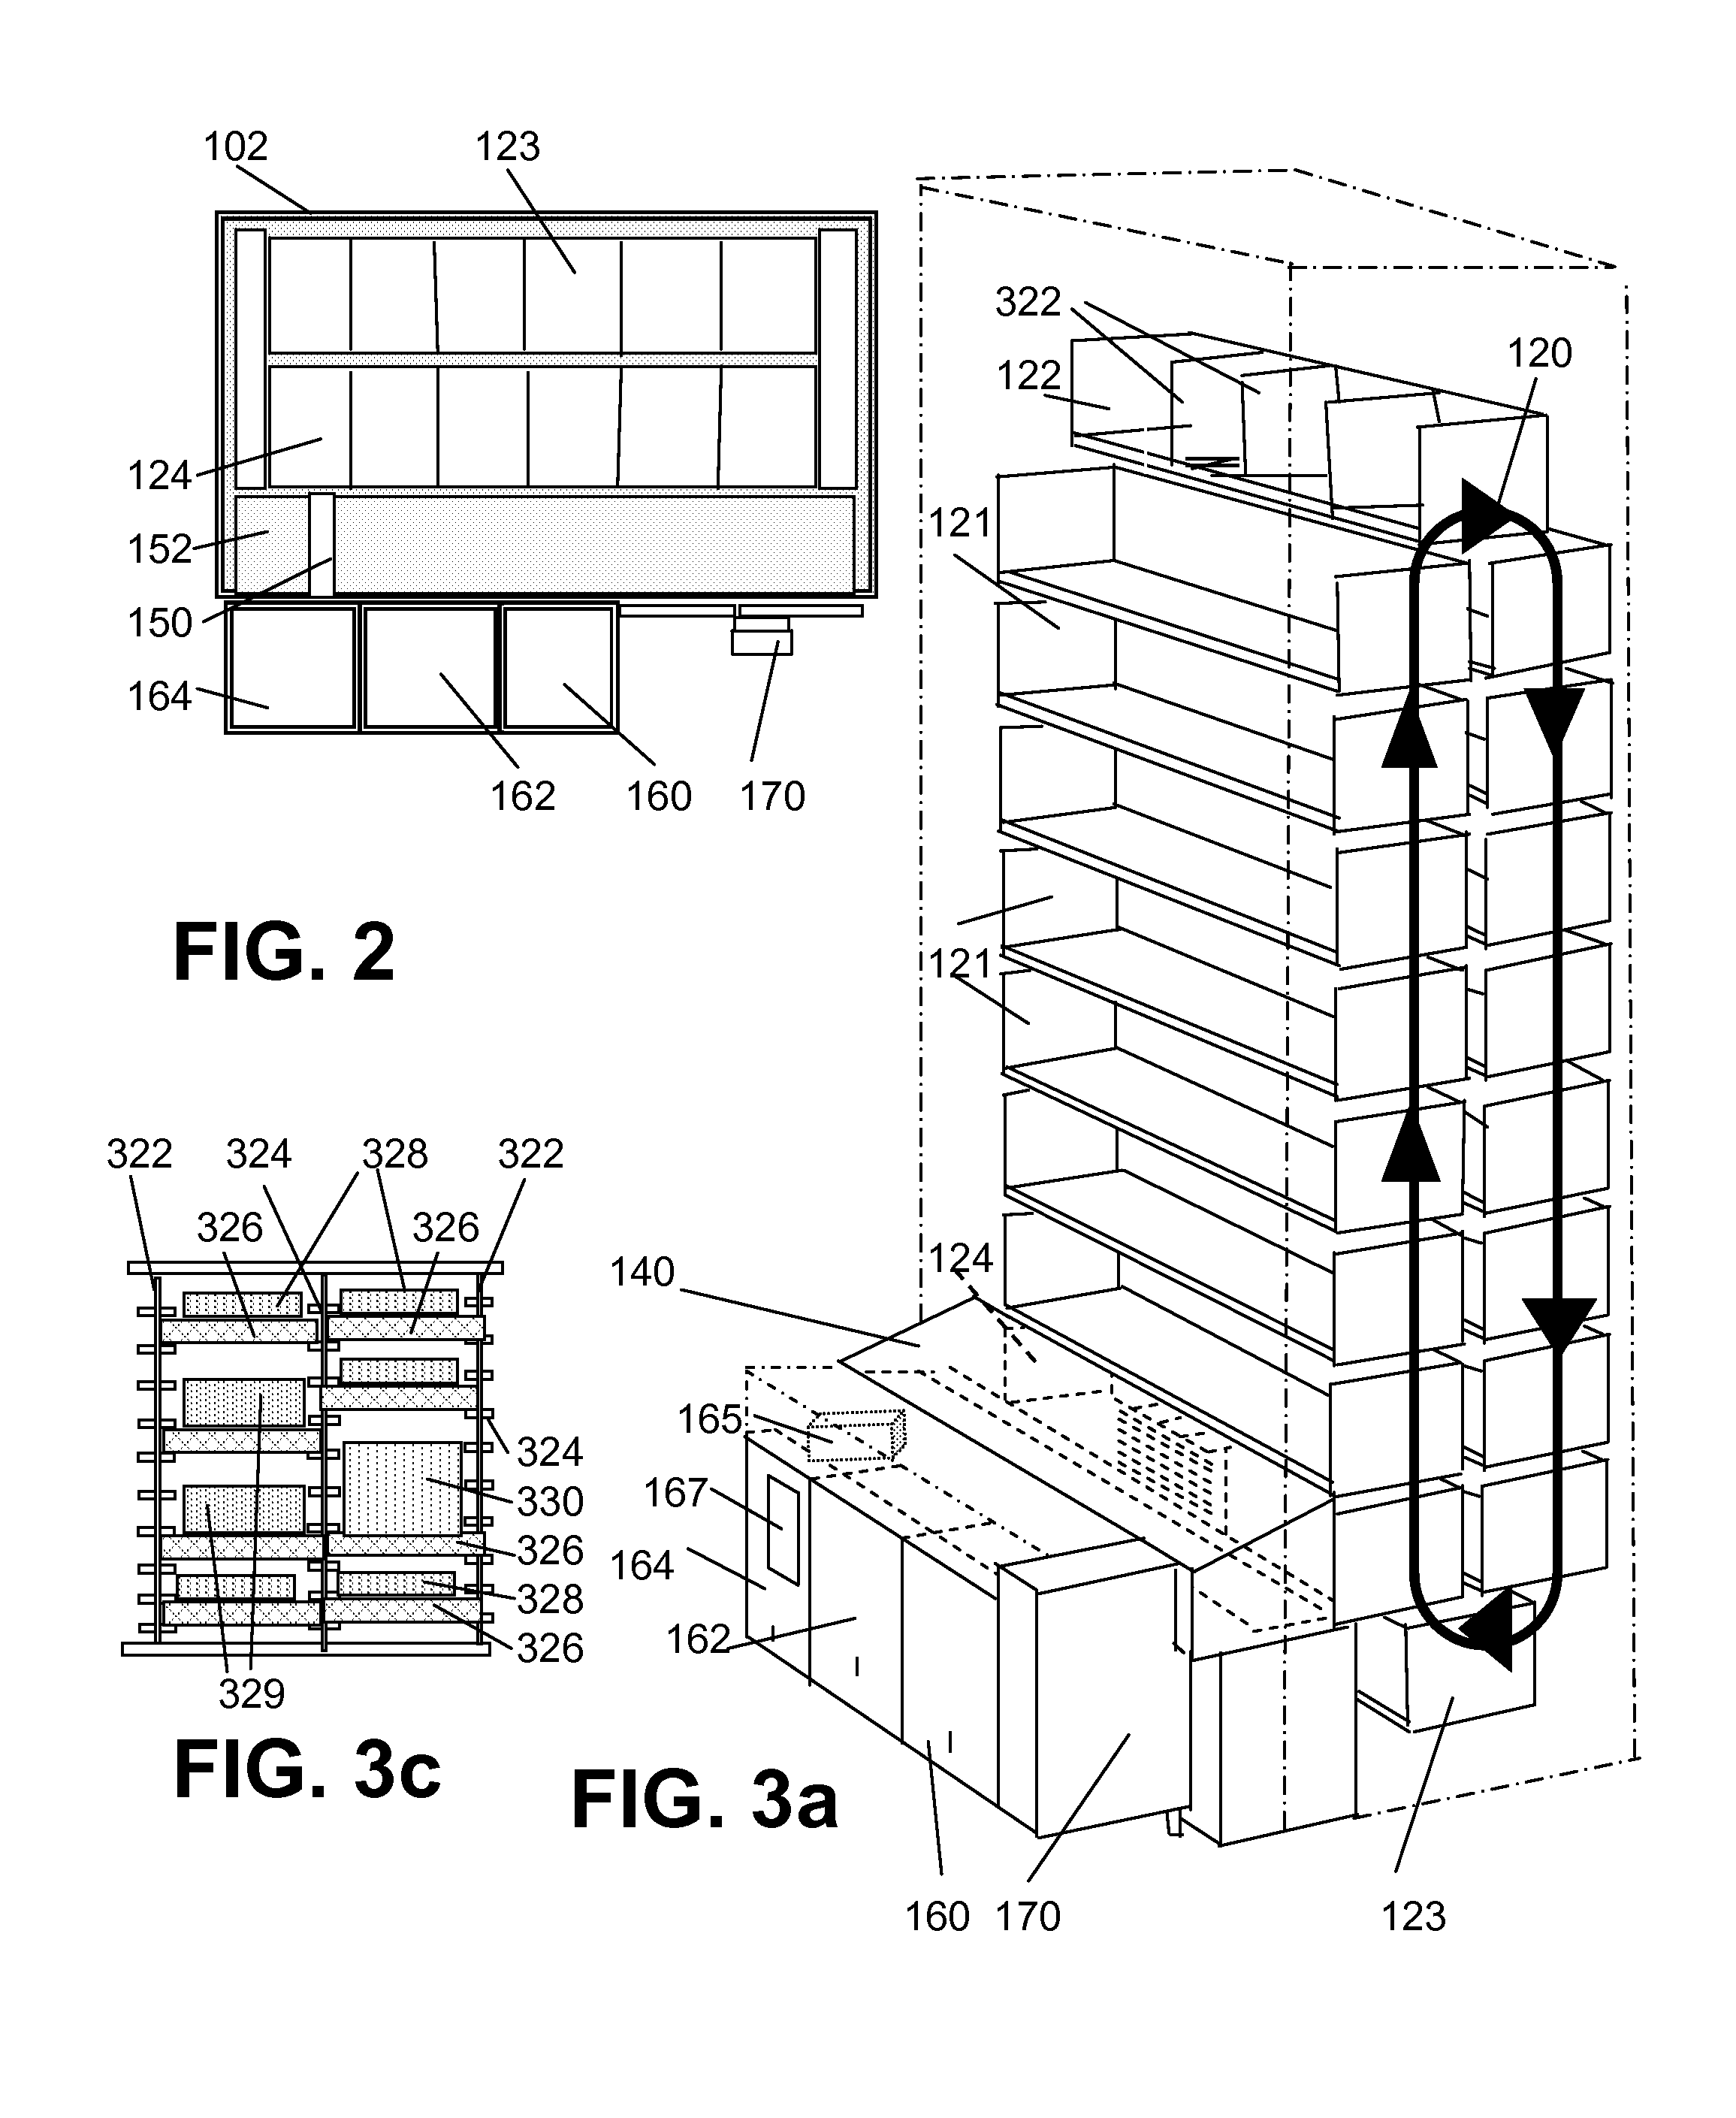 Device and method for retrieving or replacing a tray within a storage compartment